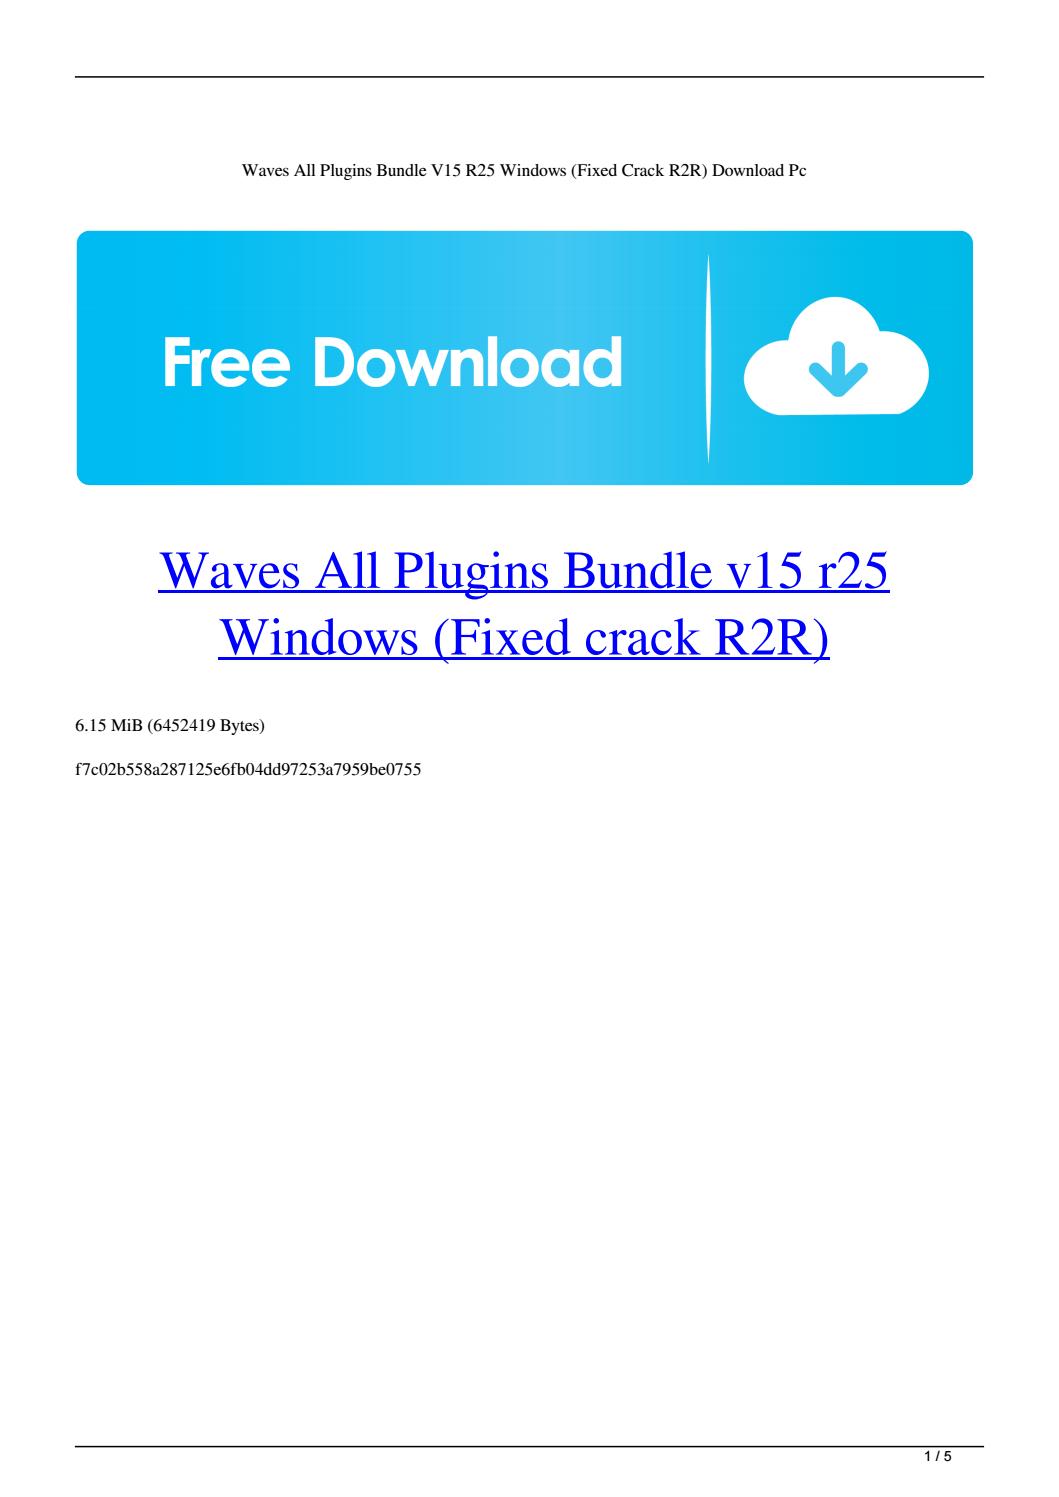 waves plugins download free with crack